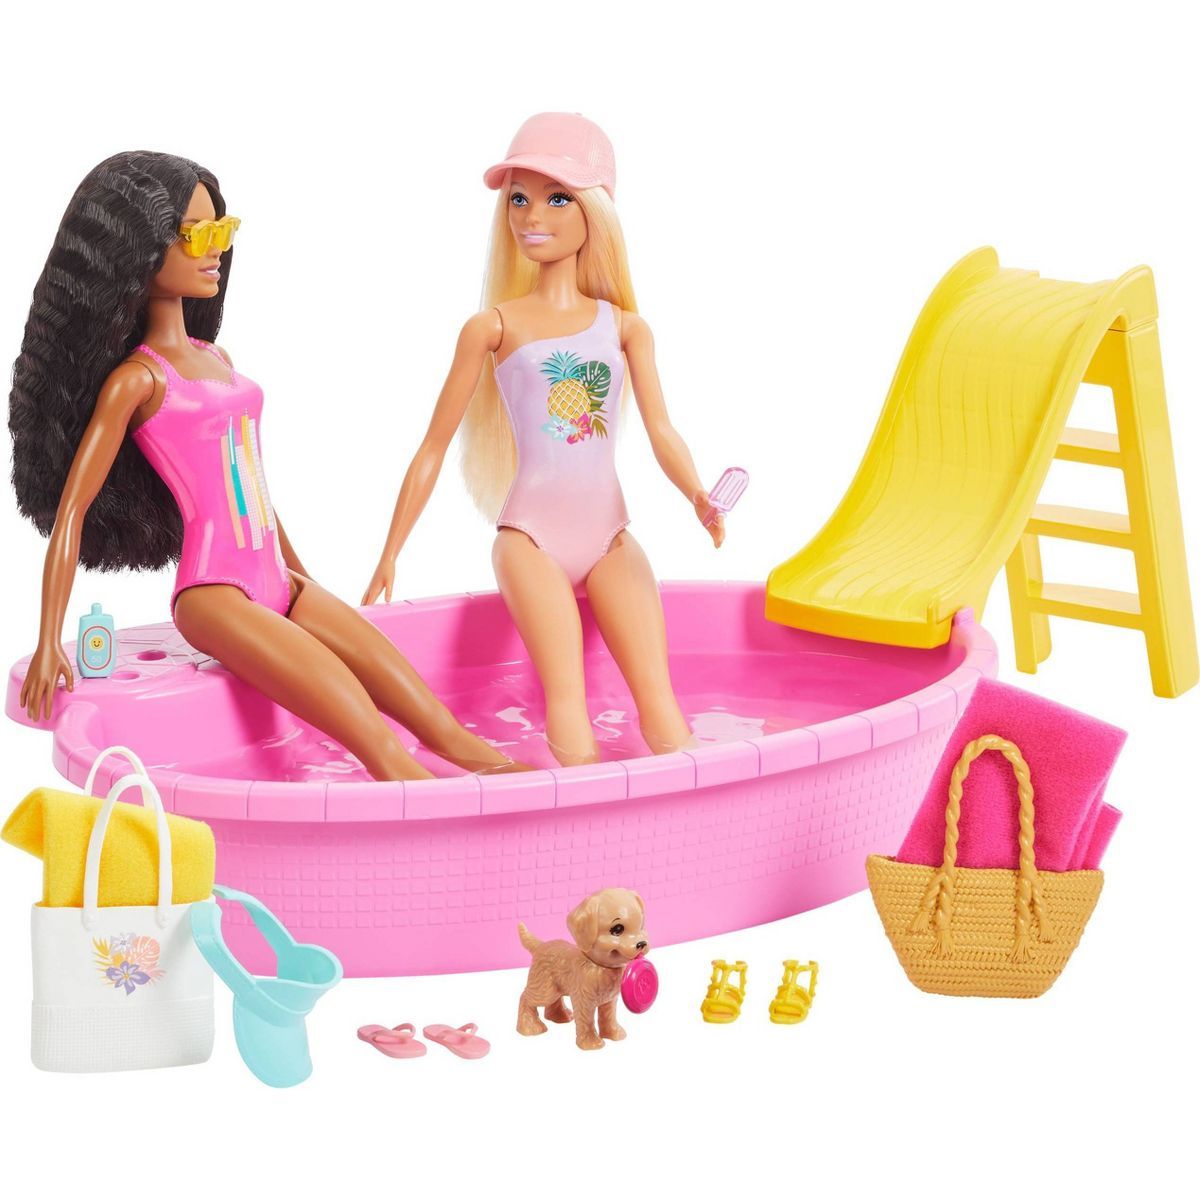 Two Barbie Dolls with Pool, Clothes and Barbie Car (Target Exclusive) | Target